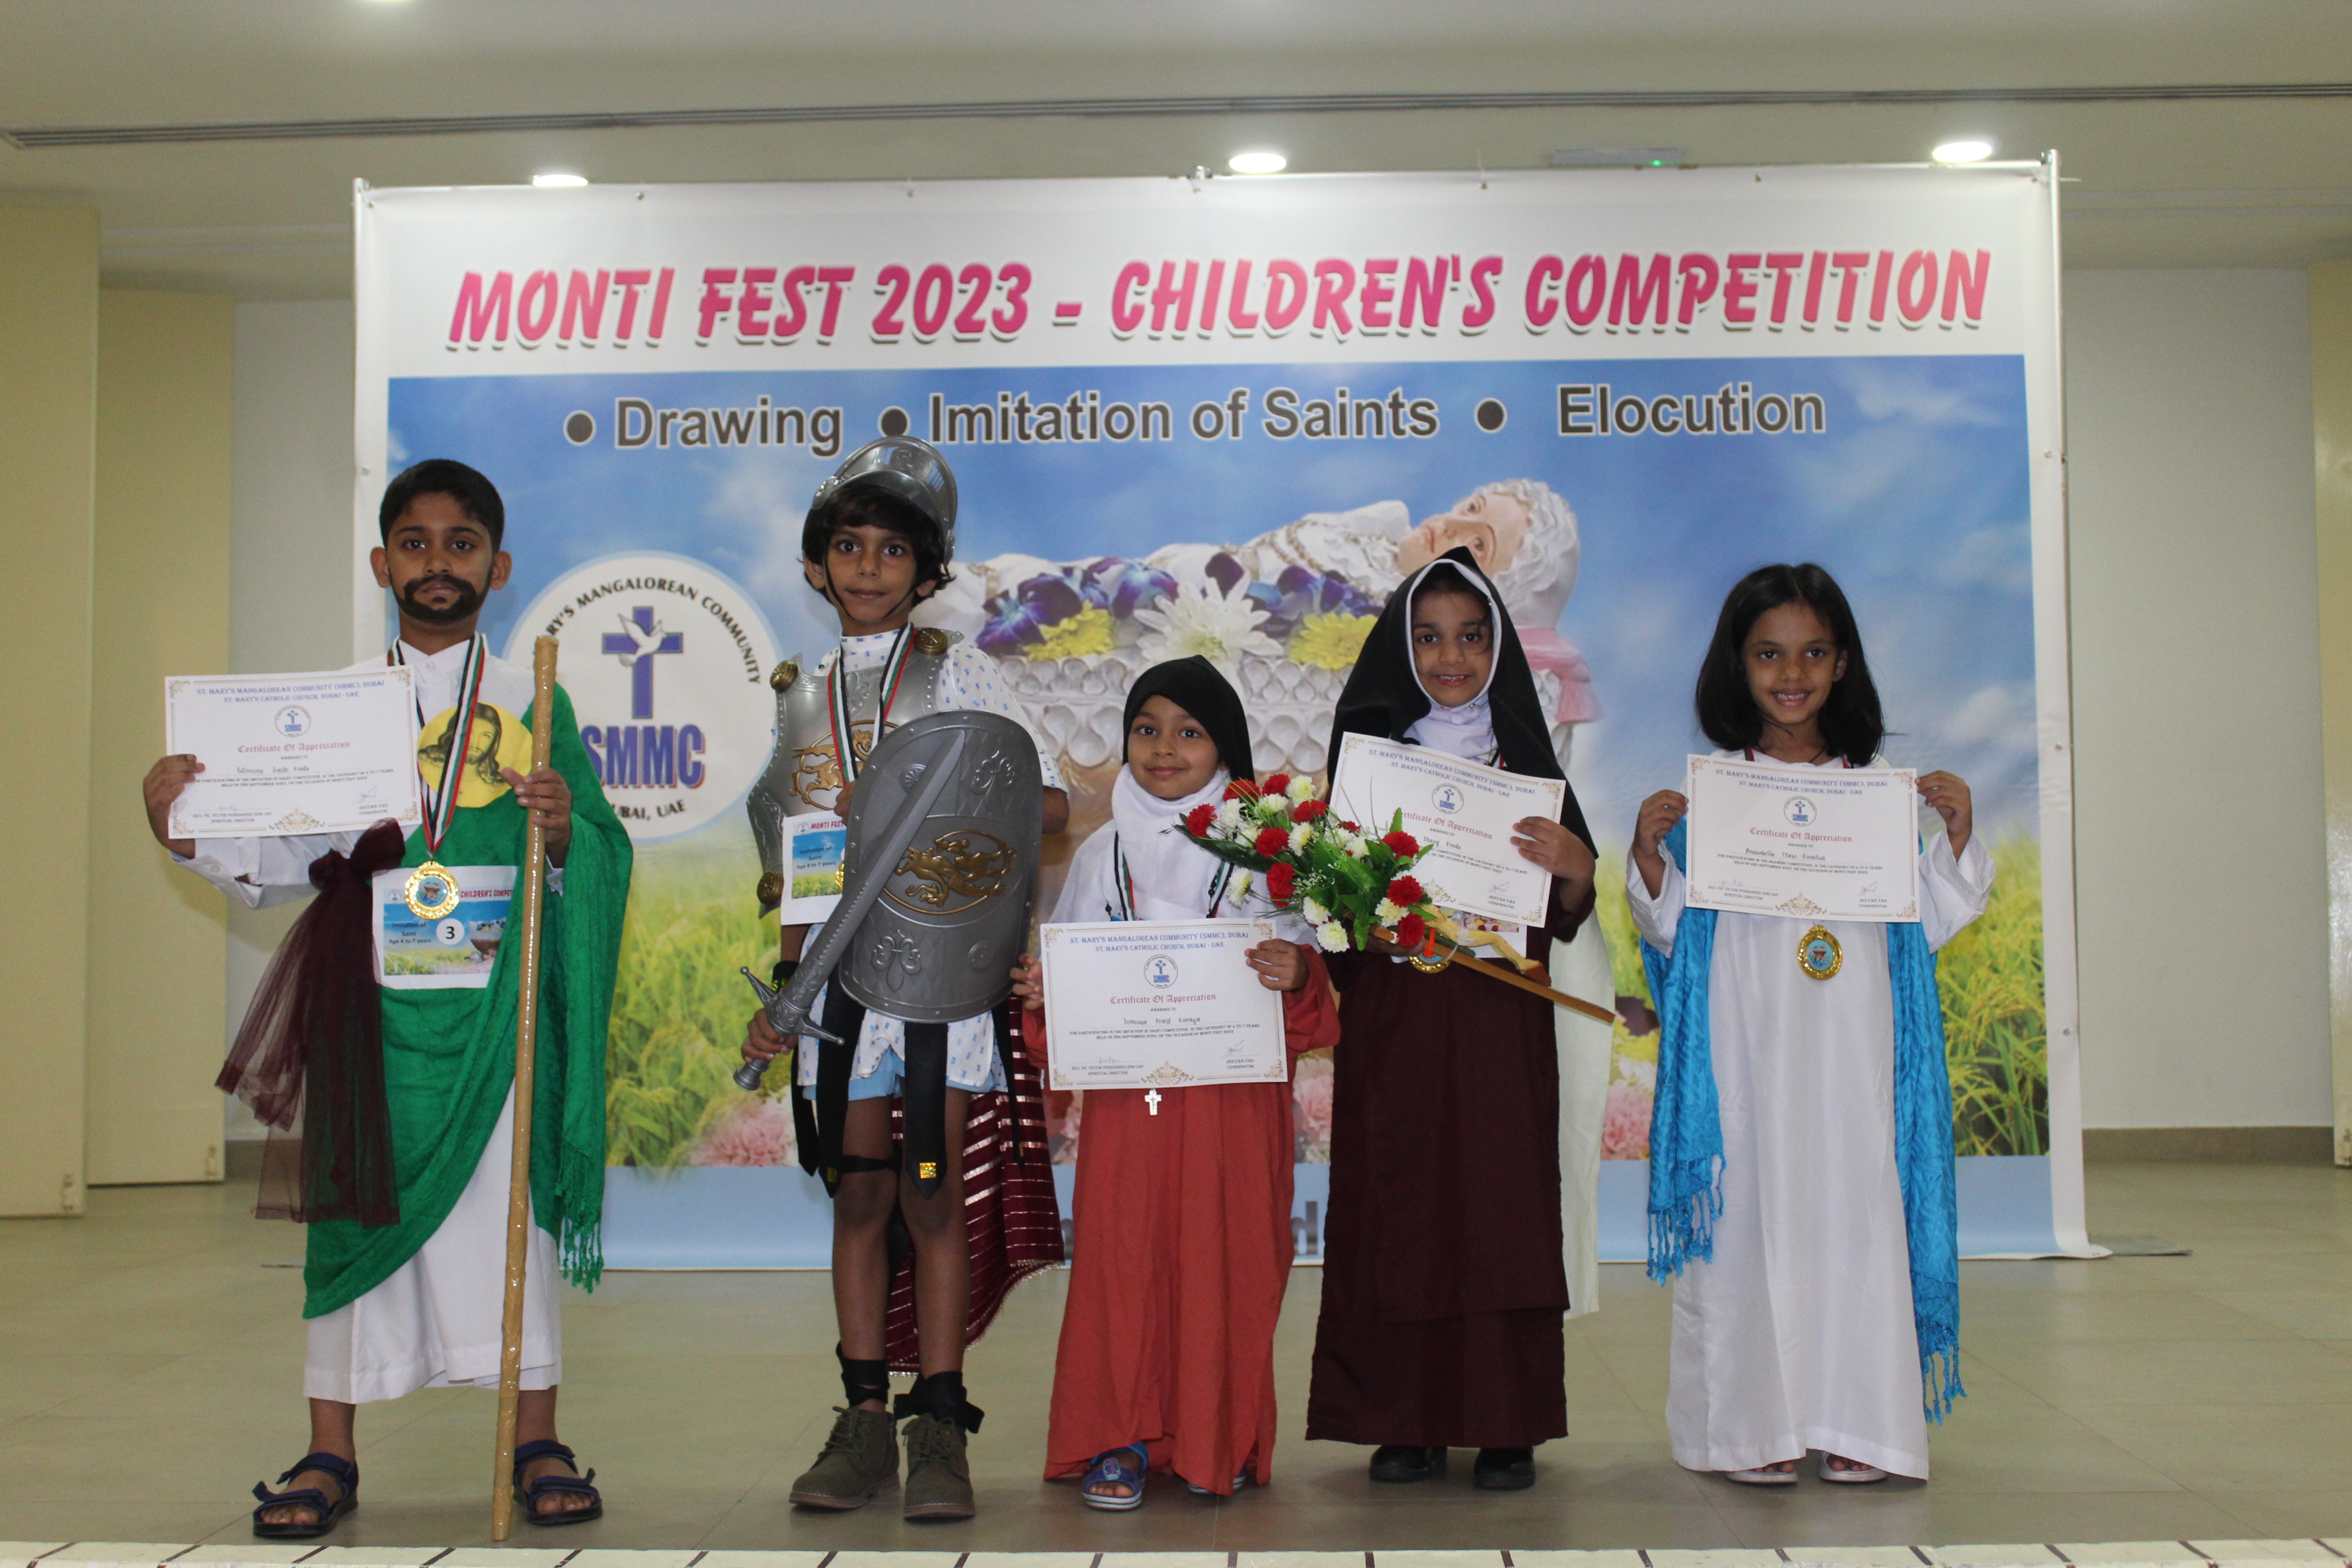 Monti Fest 2023 - ELOCUTION, DRAWING & IMITATION OF SAINT COMPETITIONS